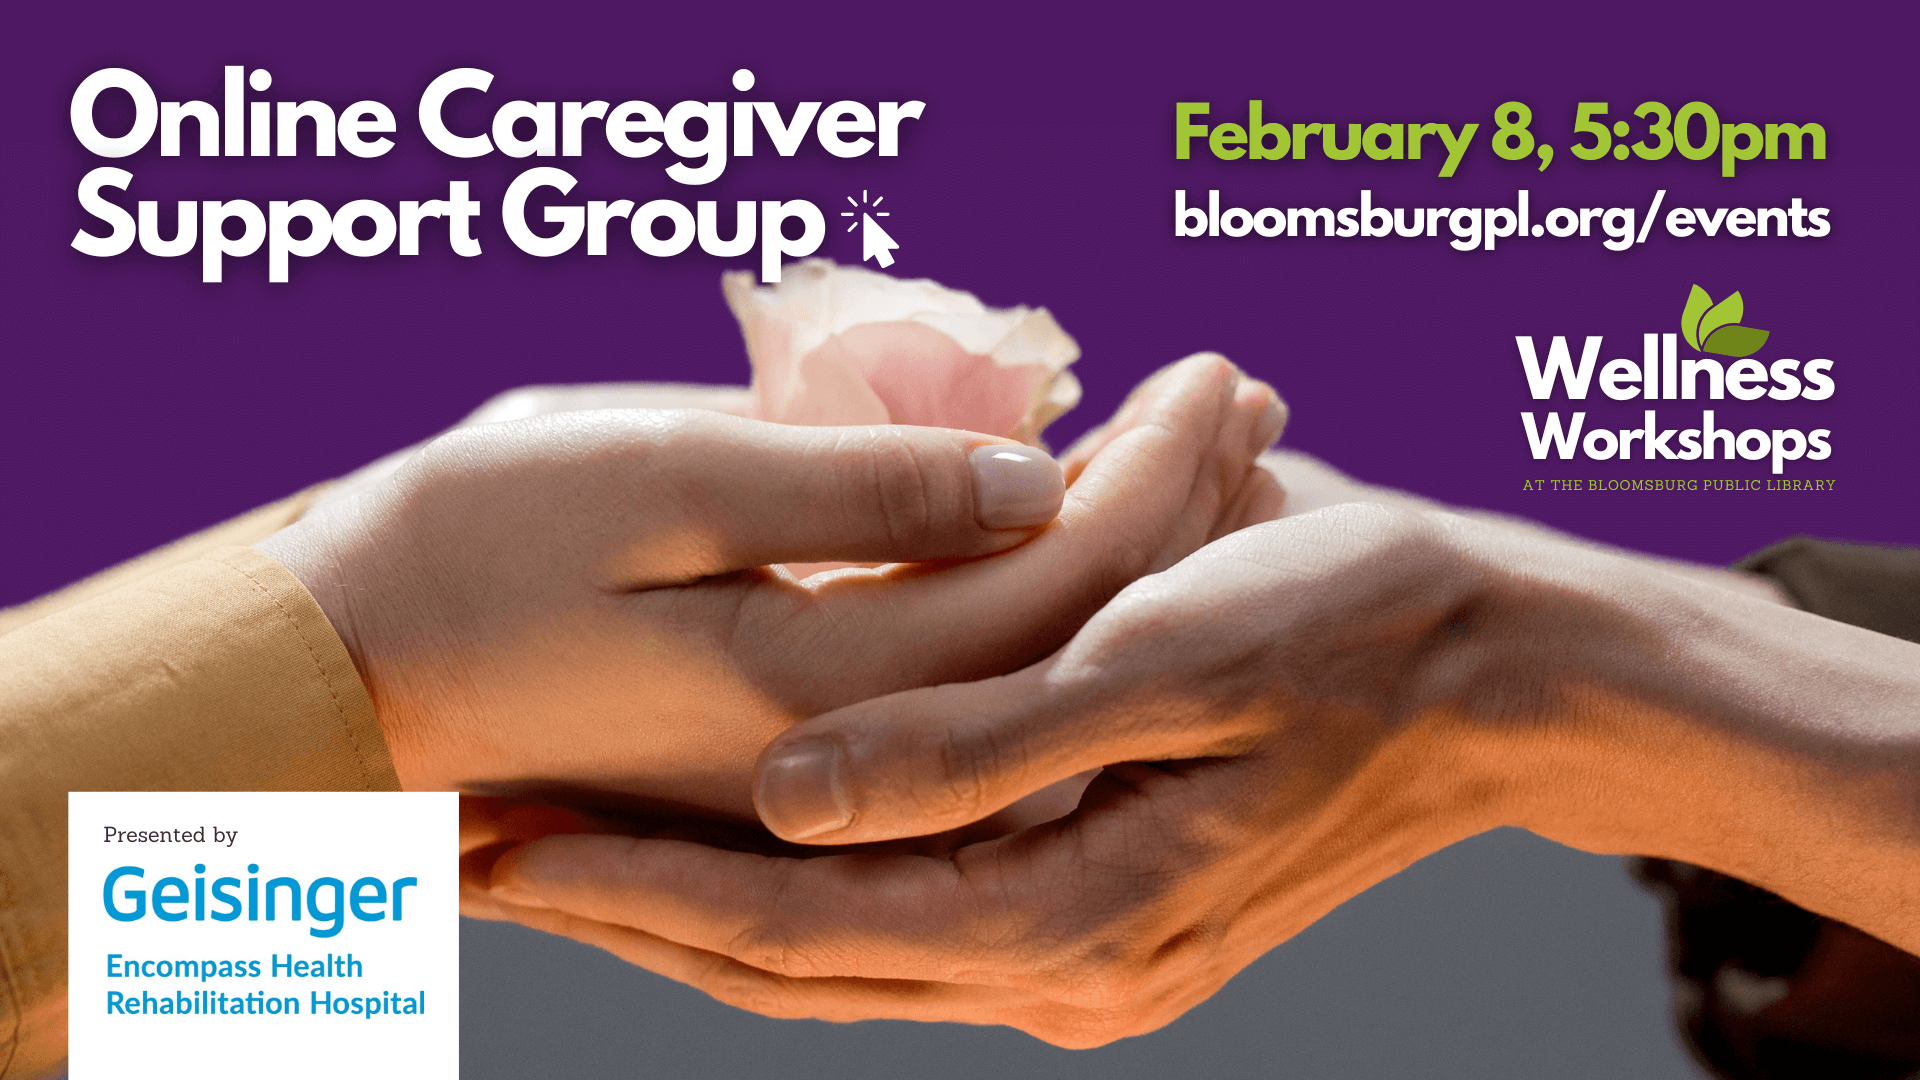 Online Caregiver Support Group - Feb 8 at 5:30pm